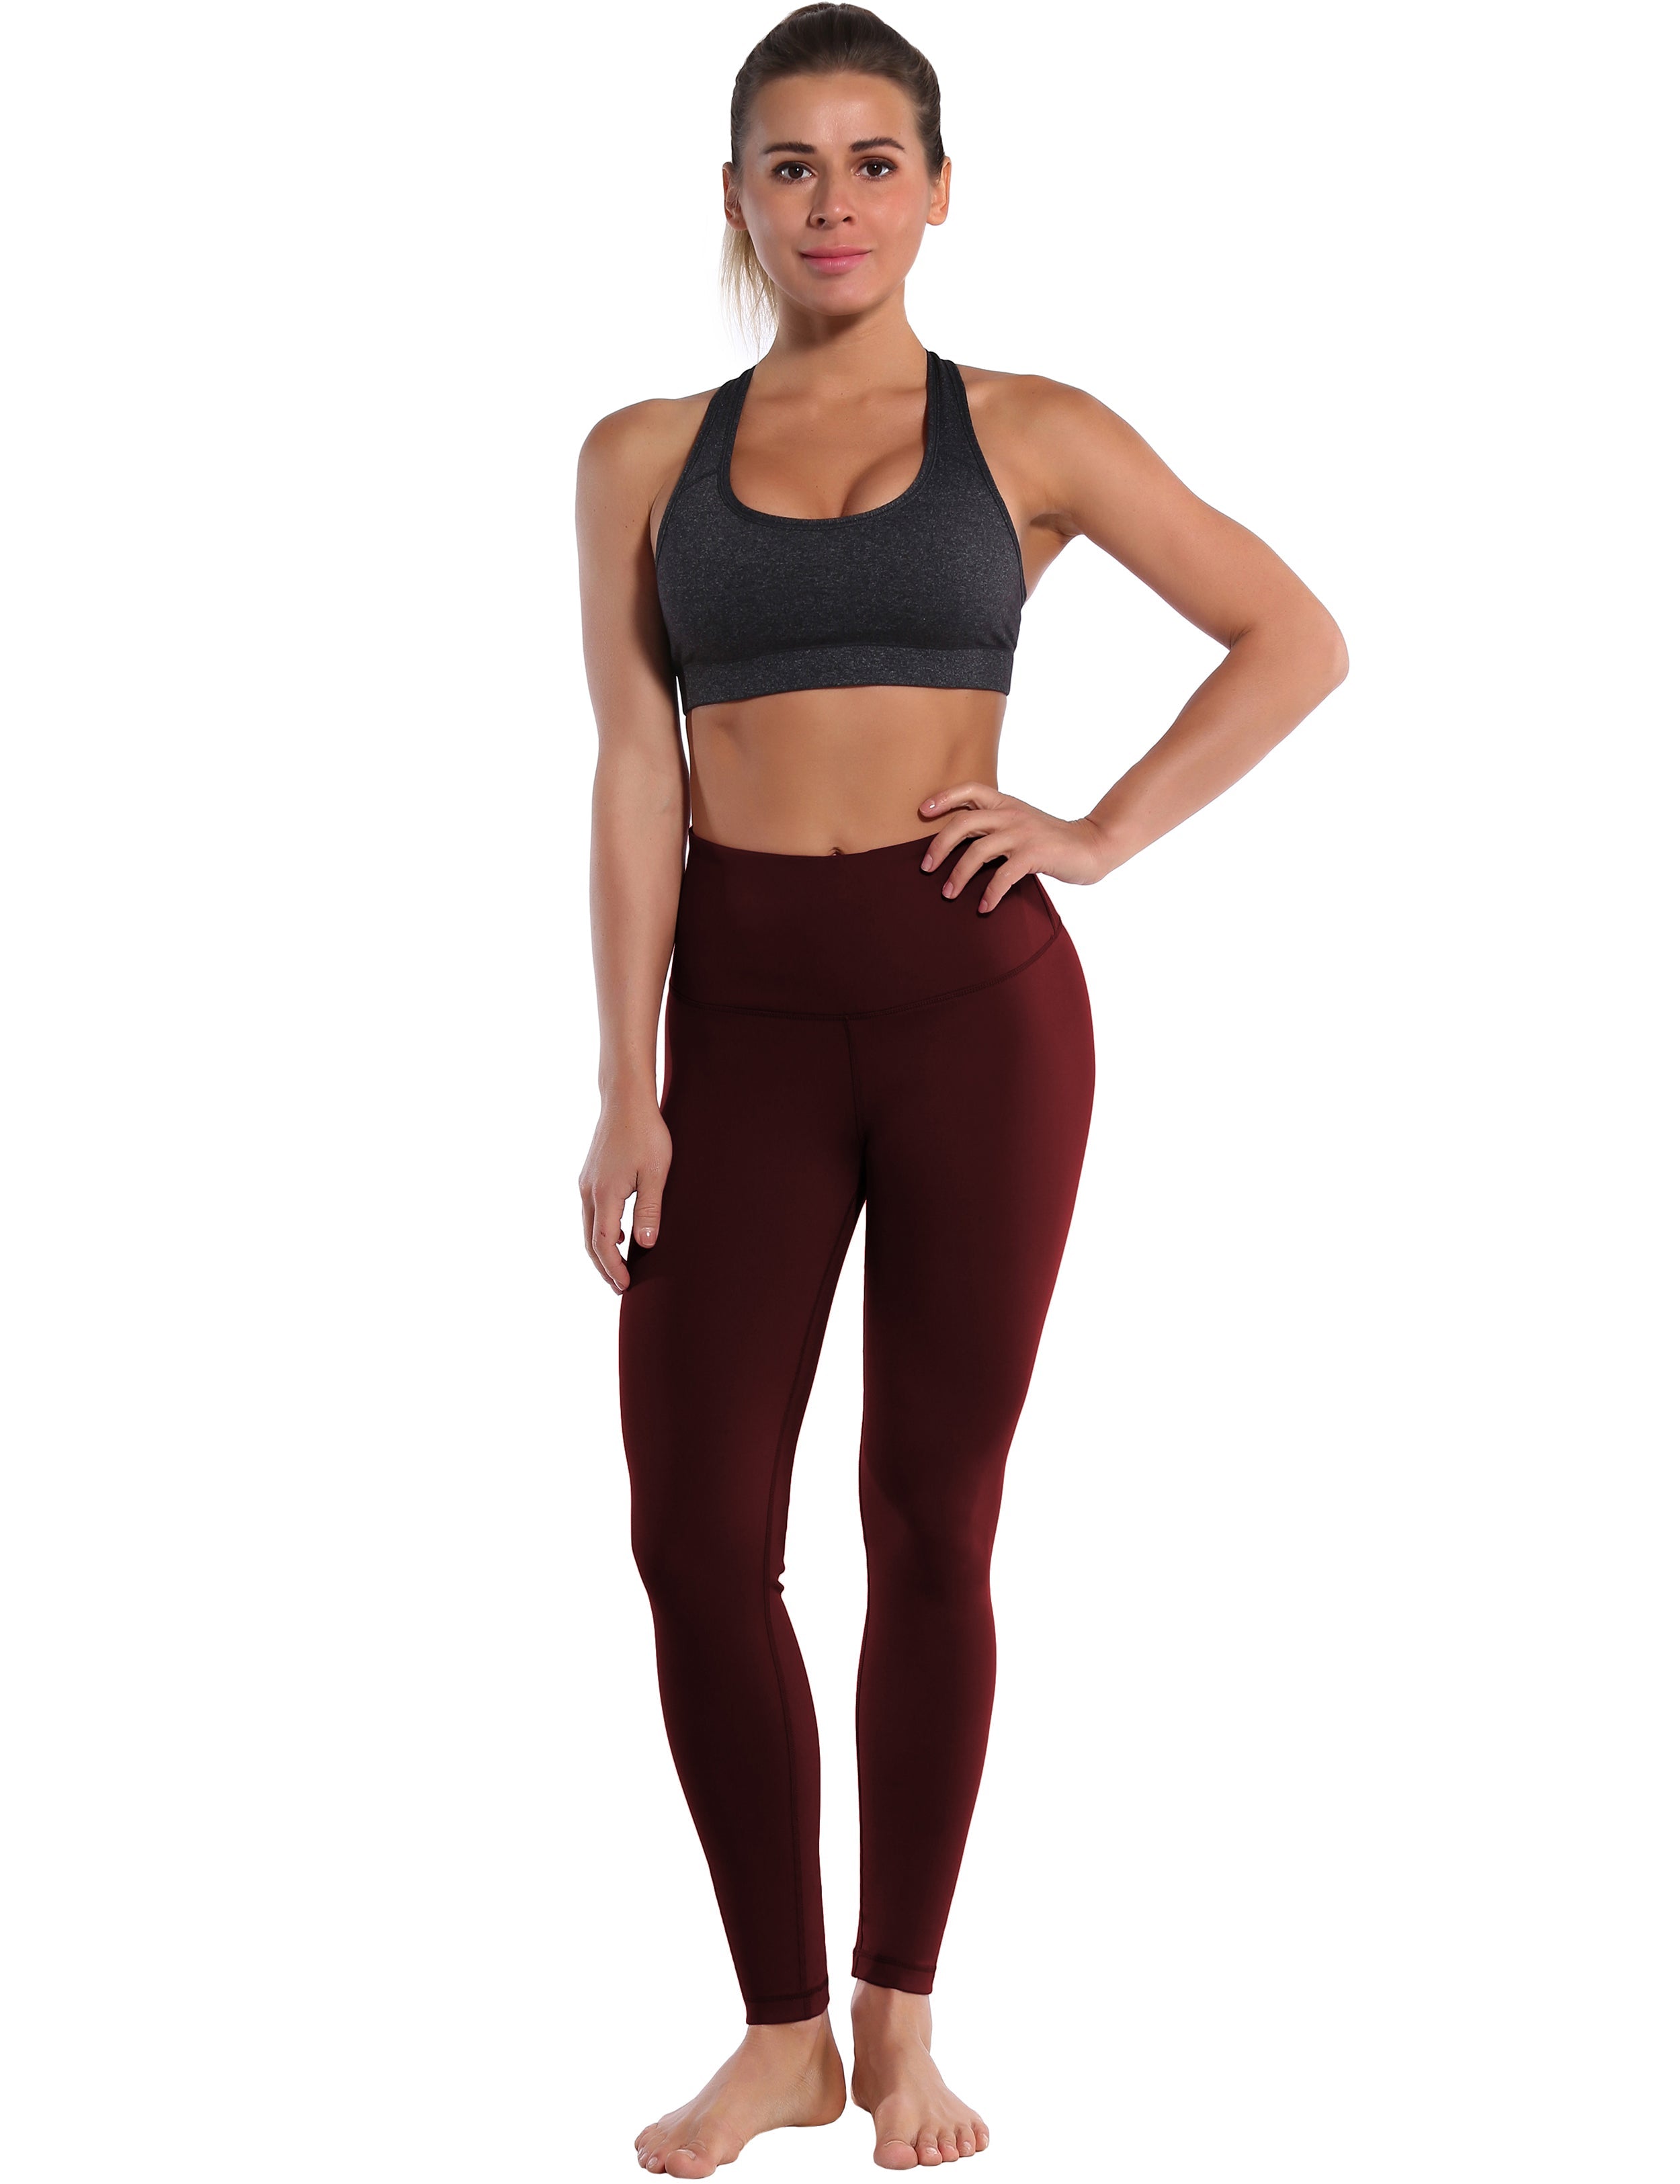 High Waist yogastudio Pants cherryred 75%Nylon/25%Spandex Fabric doesn't attract lint easily 4-way stretch No see-through Moisture-wicking Tummy control Inner pocket Four lengths